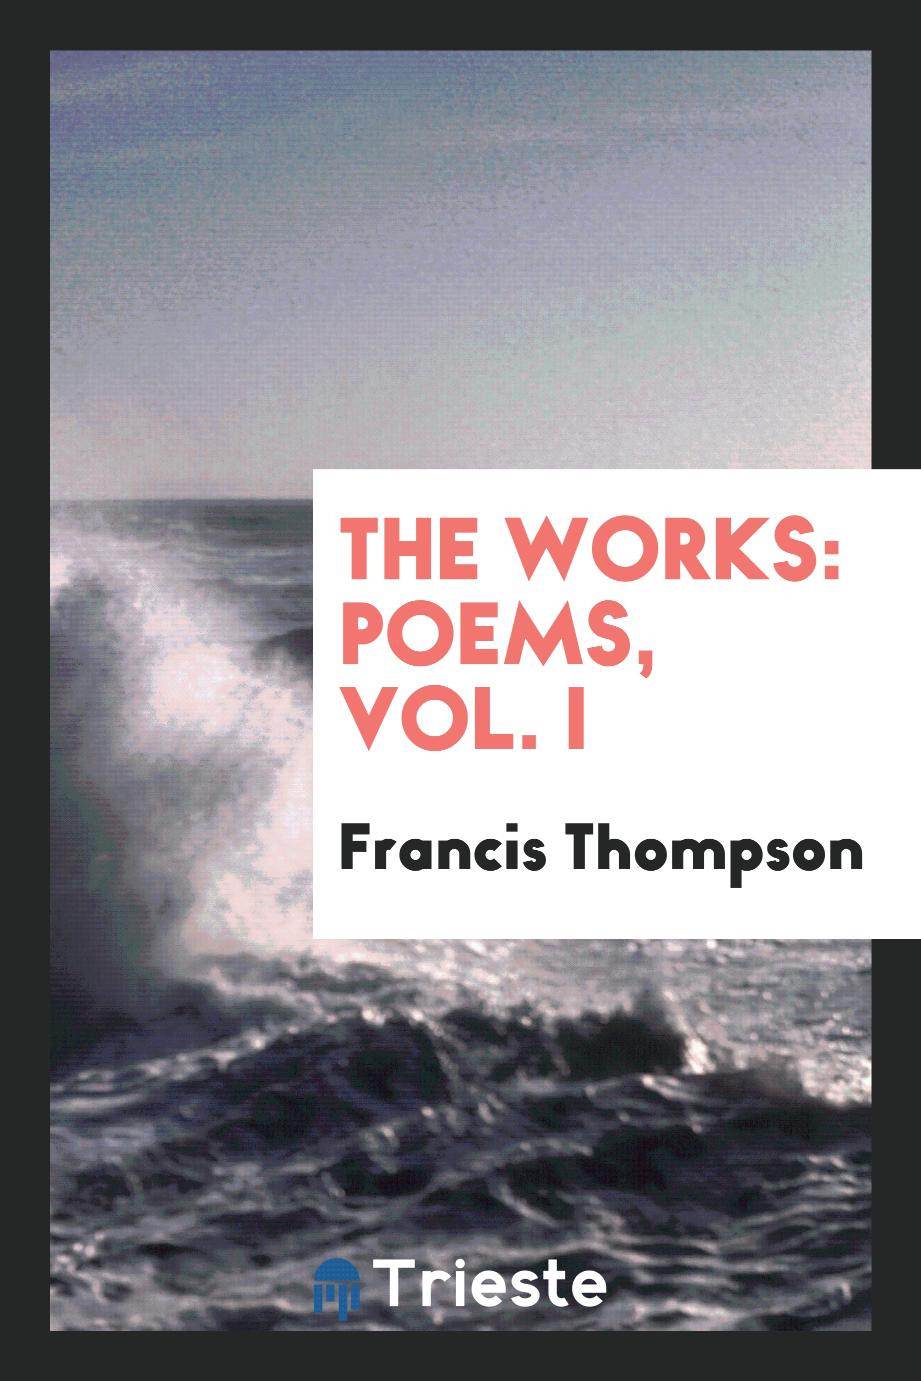 The works: poems, Vol. I